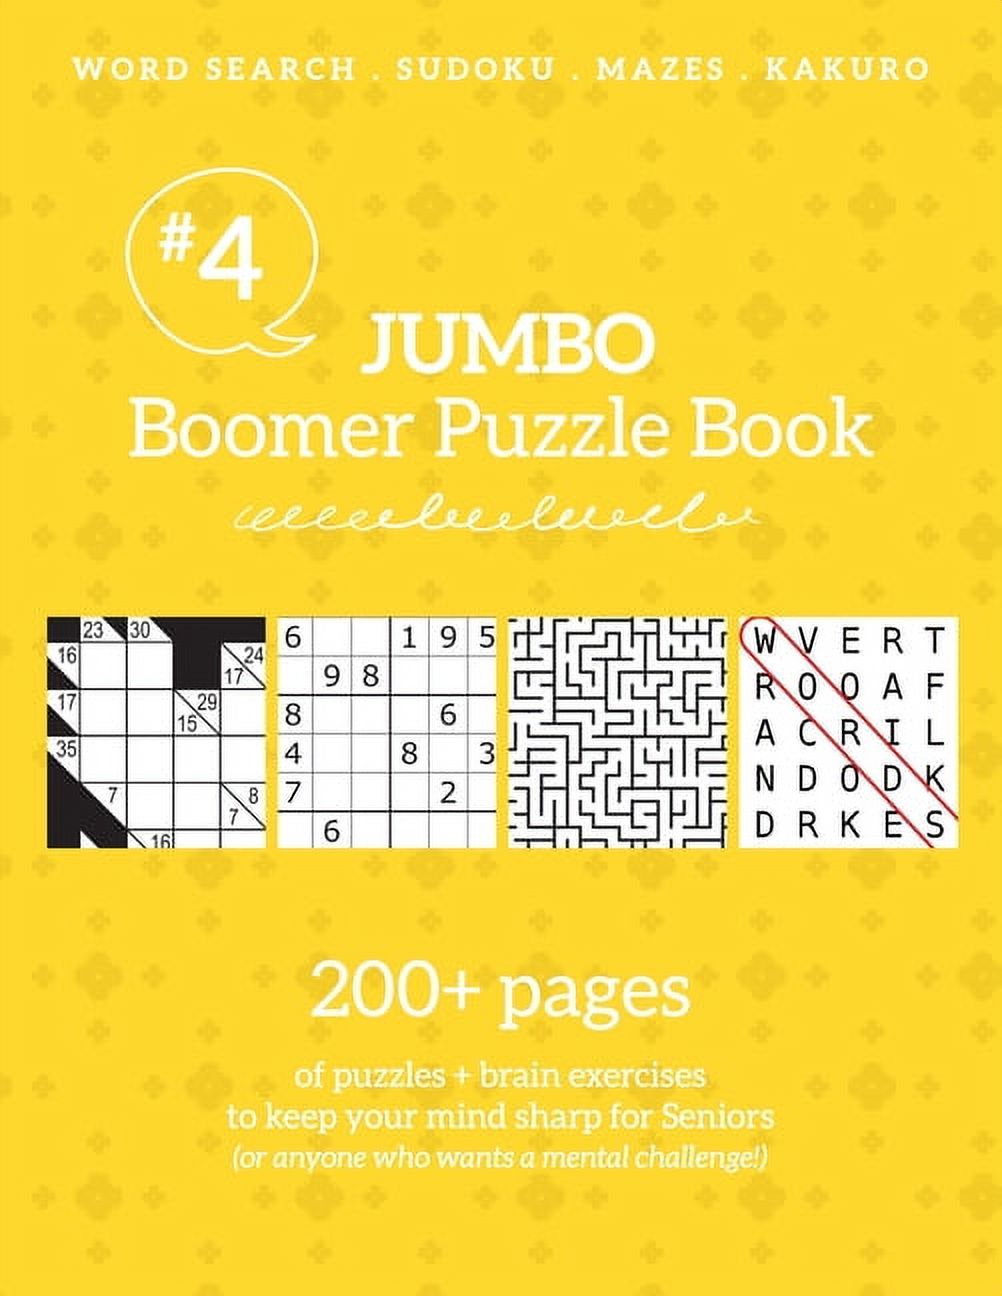 Jumbo Boomer Puzzle Book #4 : 200+ pages of puzzles & brain exercises to keep your mind sharp for Seniors: 200+ pages of puzzles & brain exercises to keep your mind sharp for Seniors (Paperback) - image 1 of 1